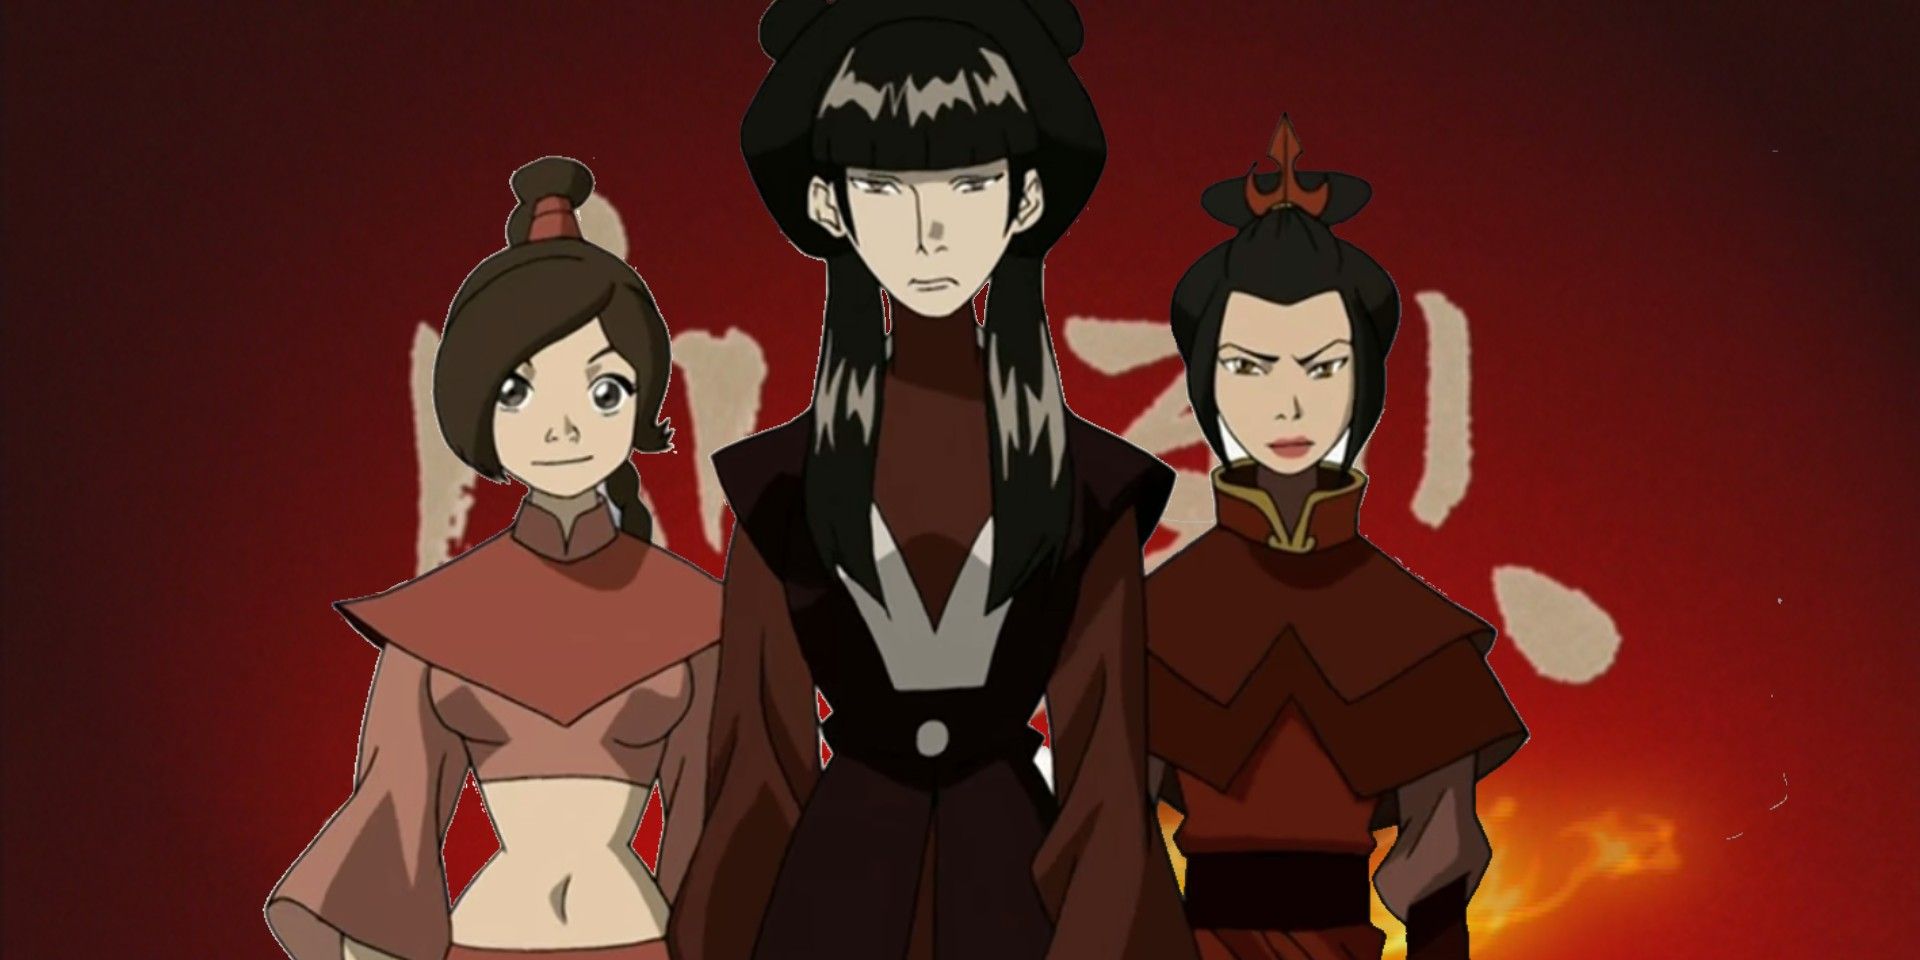 Azula, Mai, and Ty Lee standing side by side in Avatar The Last Airbender